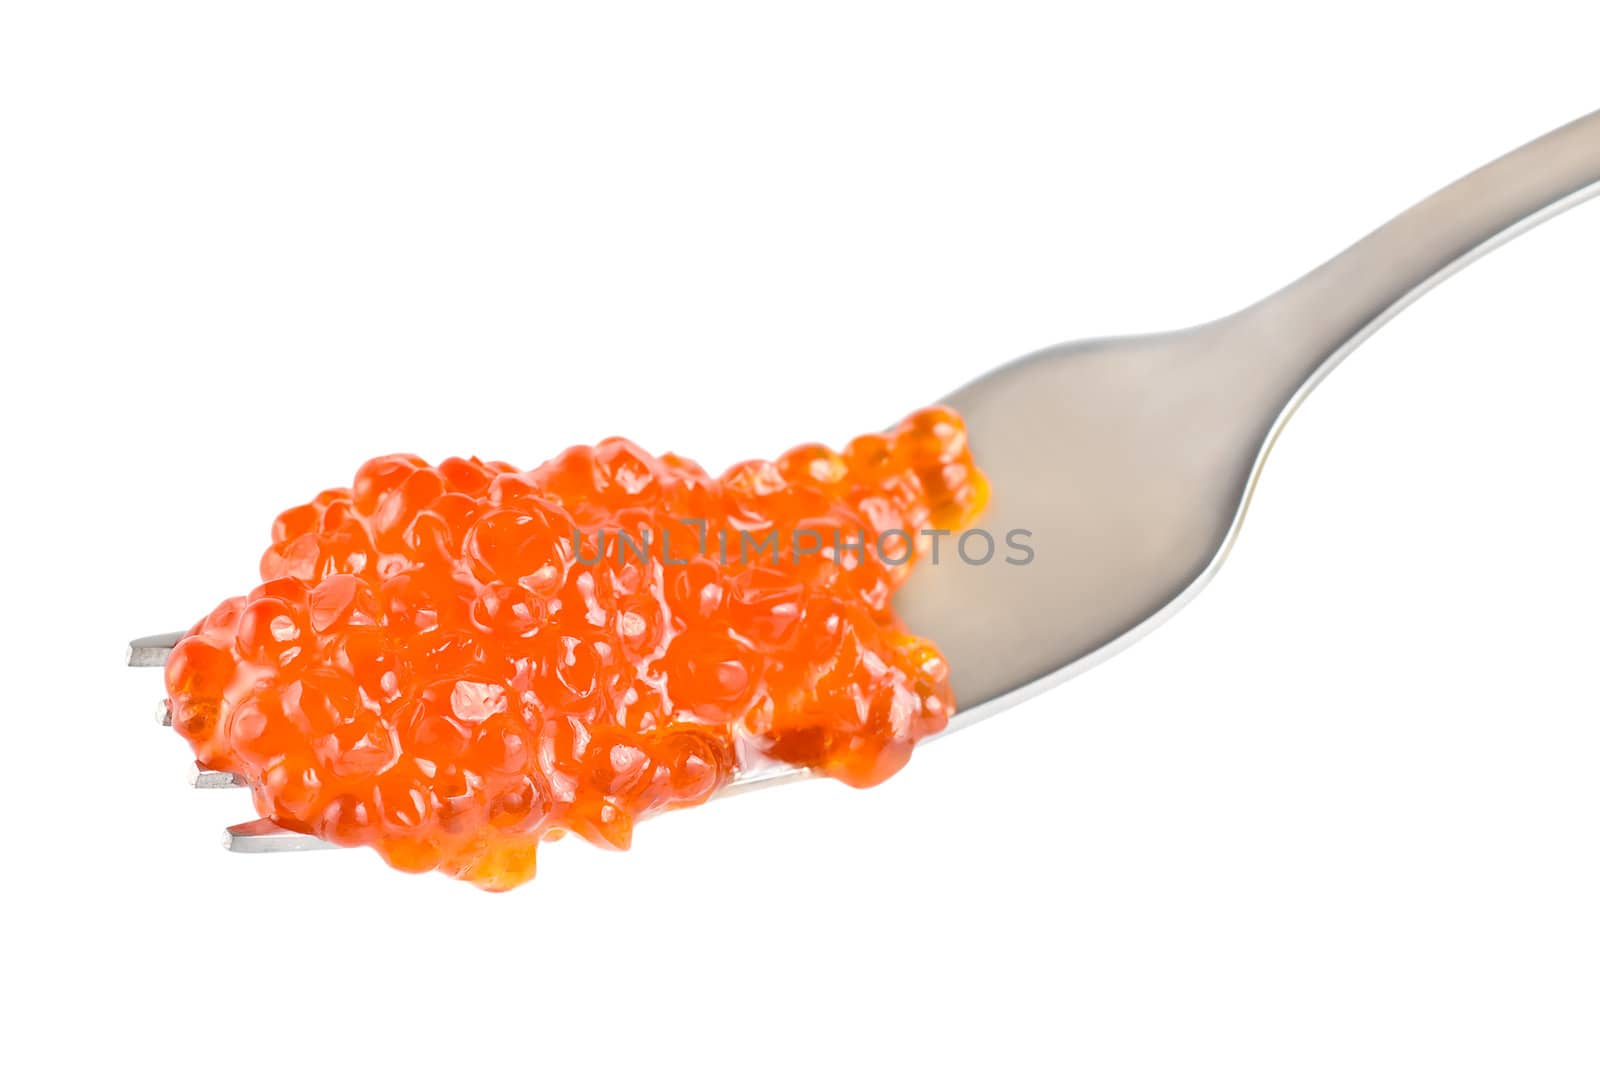 Red caviar on a fork by Givaga